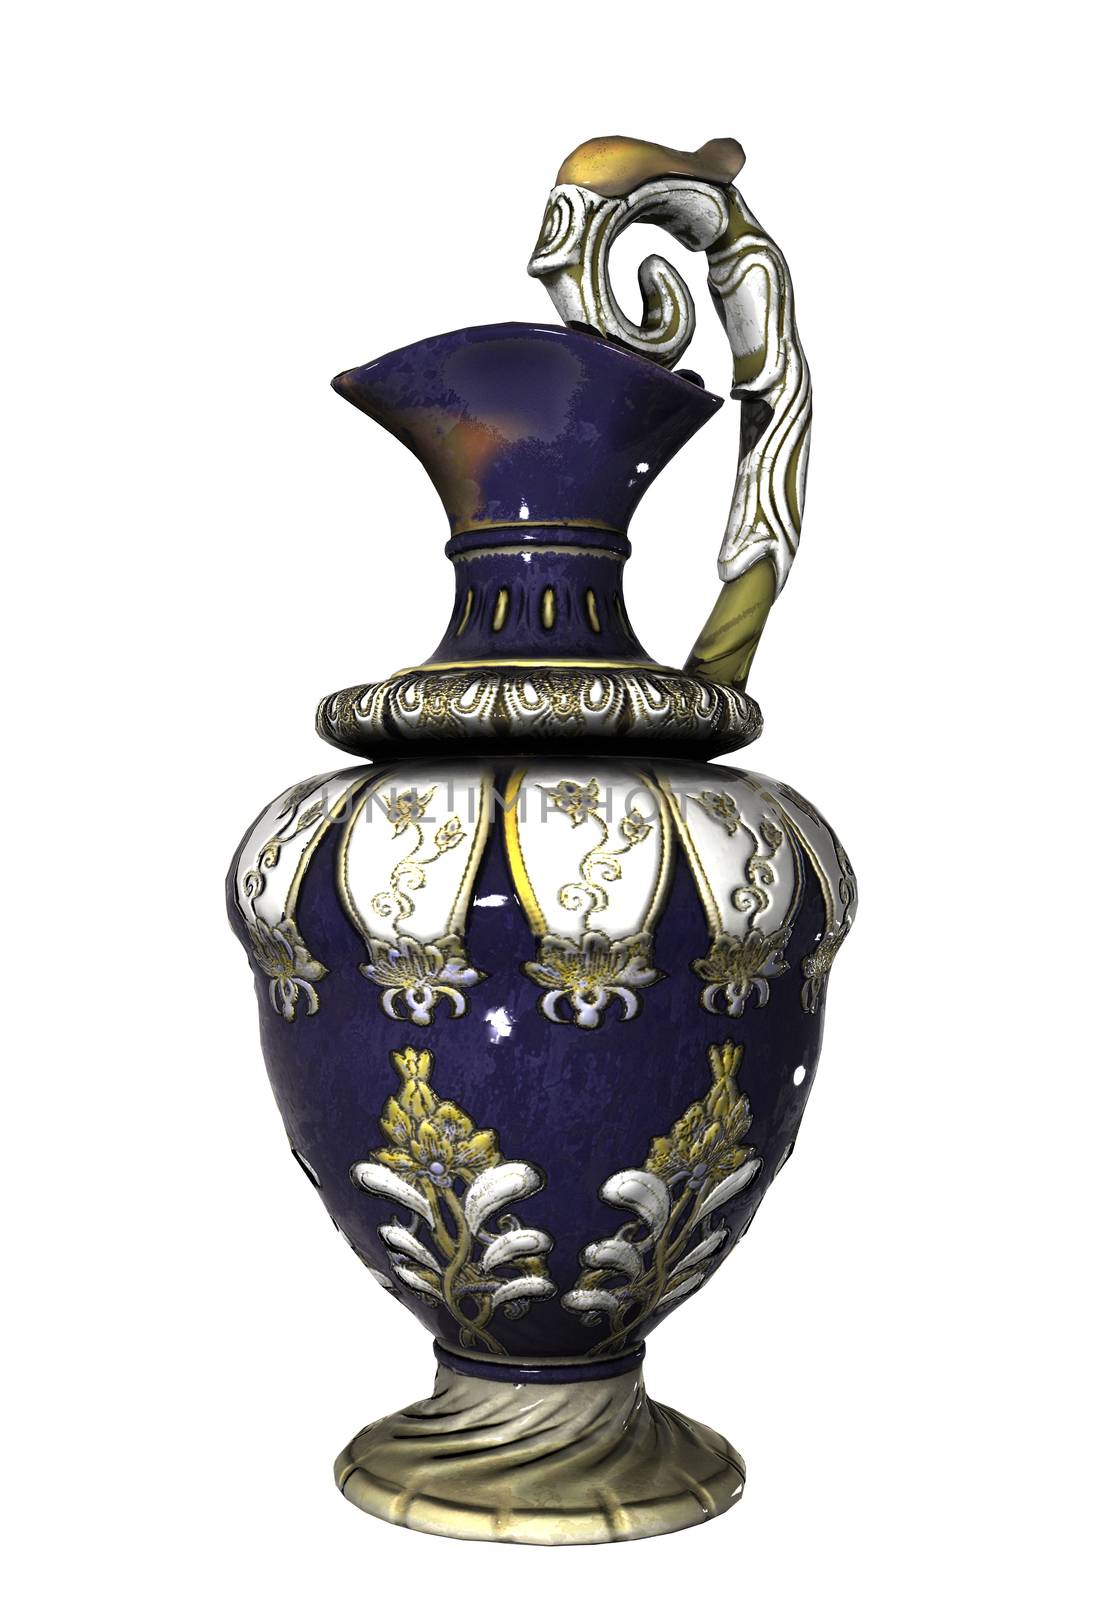 Blue Chinese vase with floral pattern by Morphart